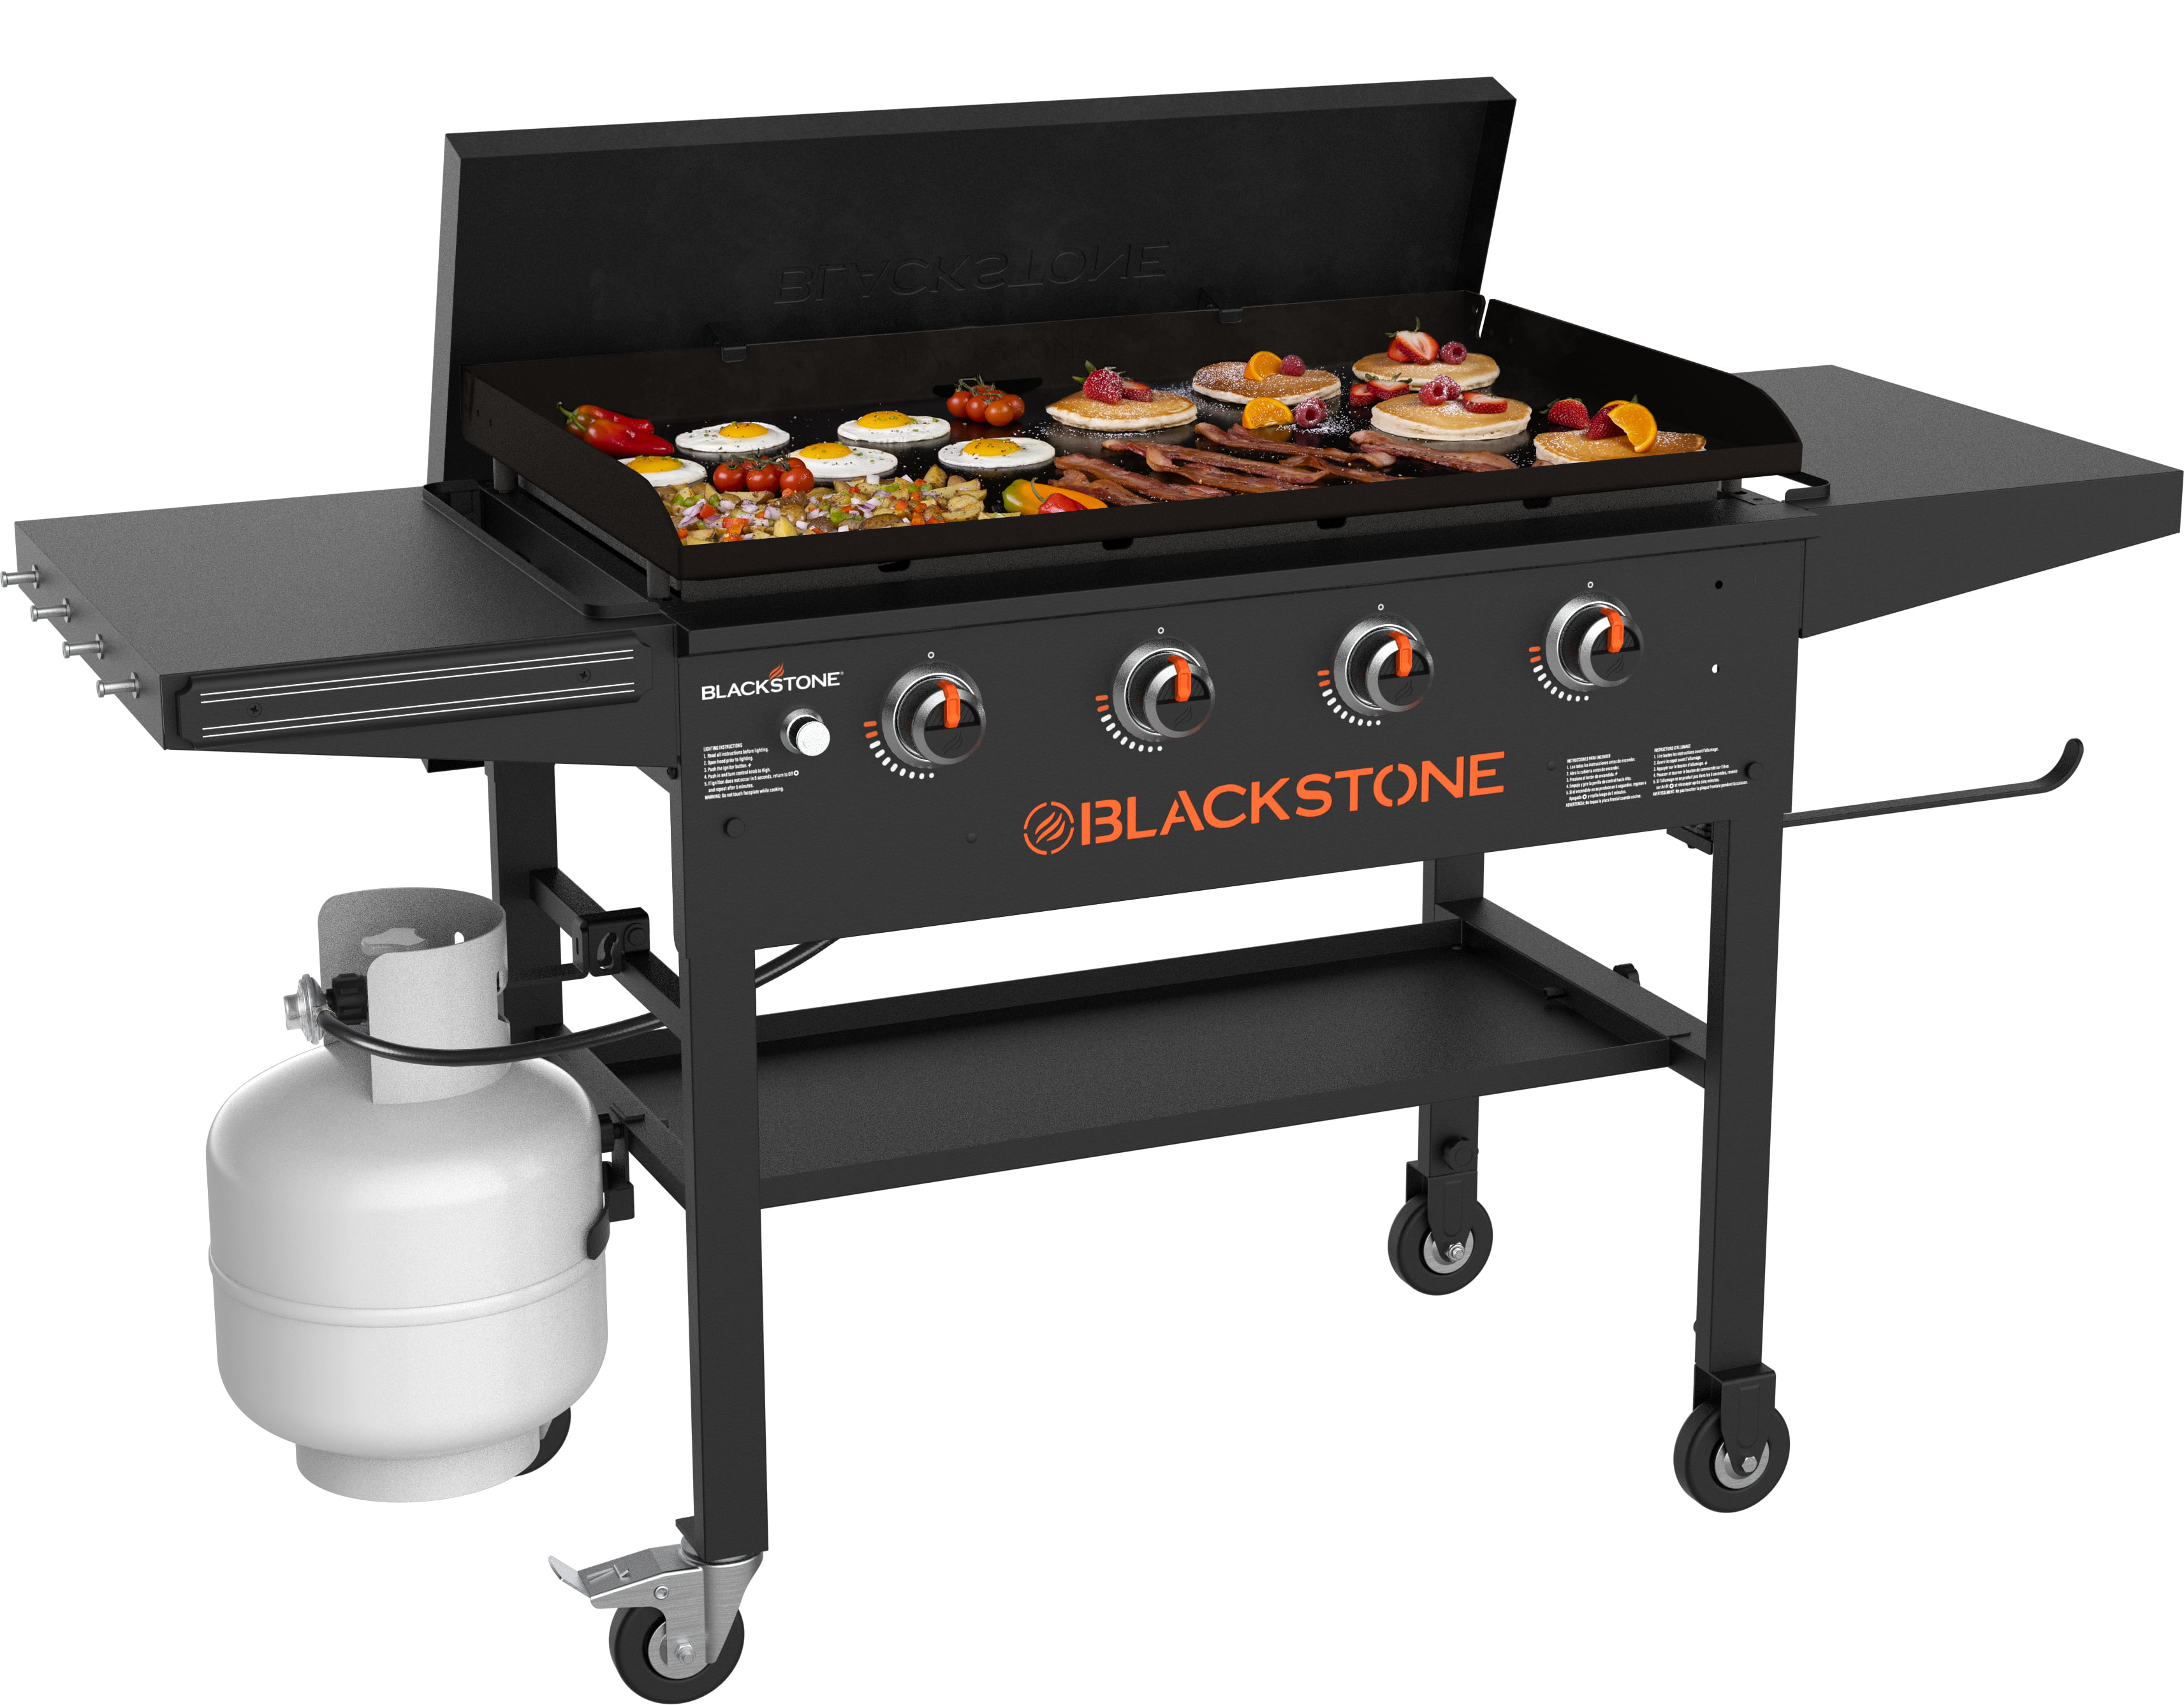 36" Blackstone 4-Burner Griddle Cooking Station w/ Hard Cover $297 + Free Shipping